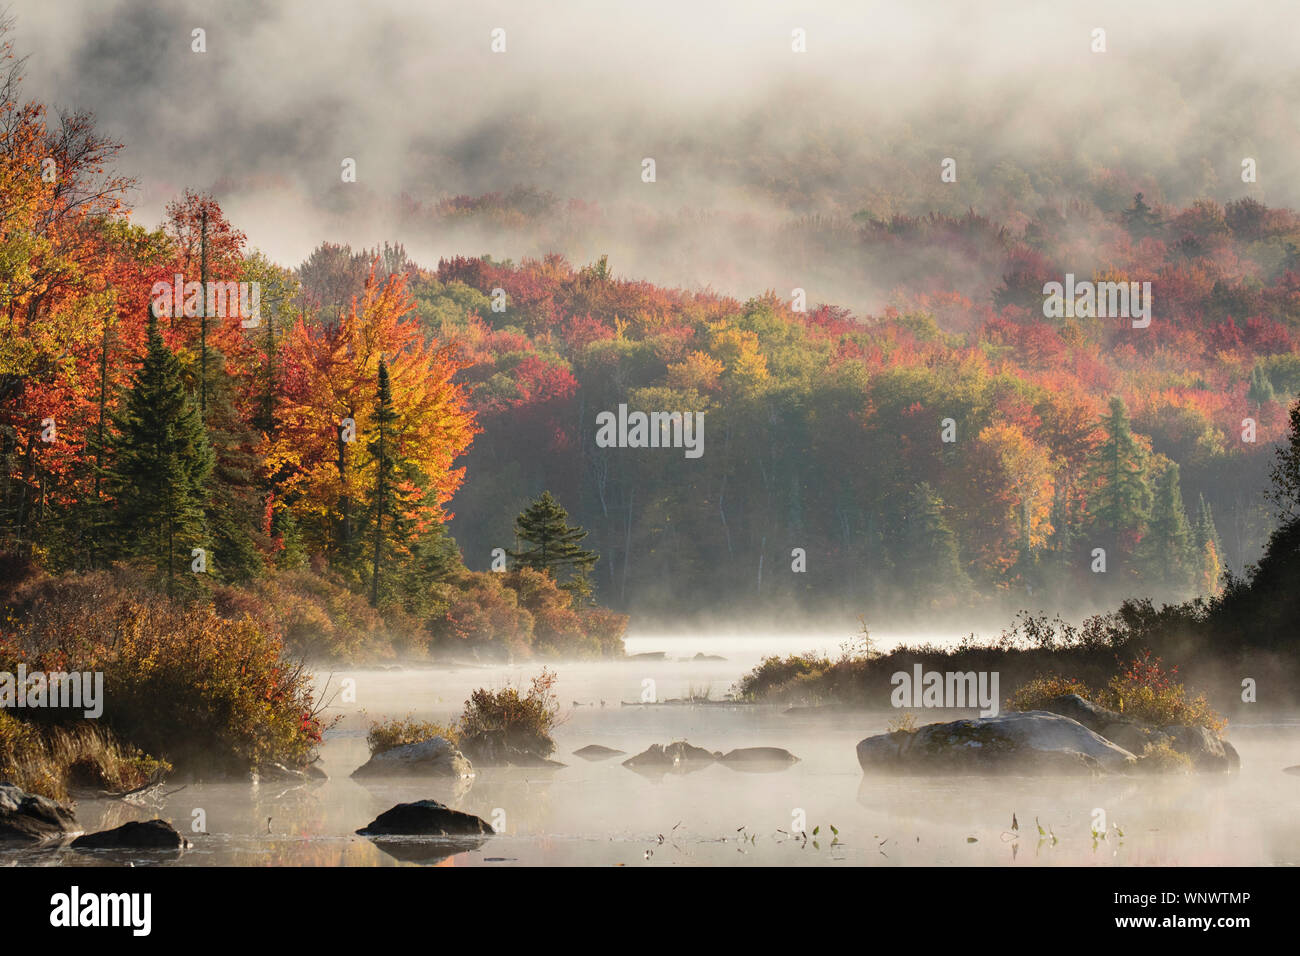 Beautiful foggy scenes filled with fall foliage found in New England. Colorful fall leaves reflect in the ponds while mist moves the deciduous trees Stock Photo